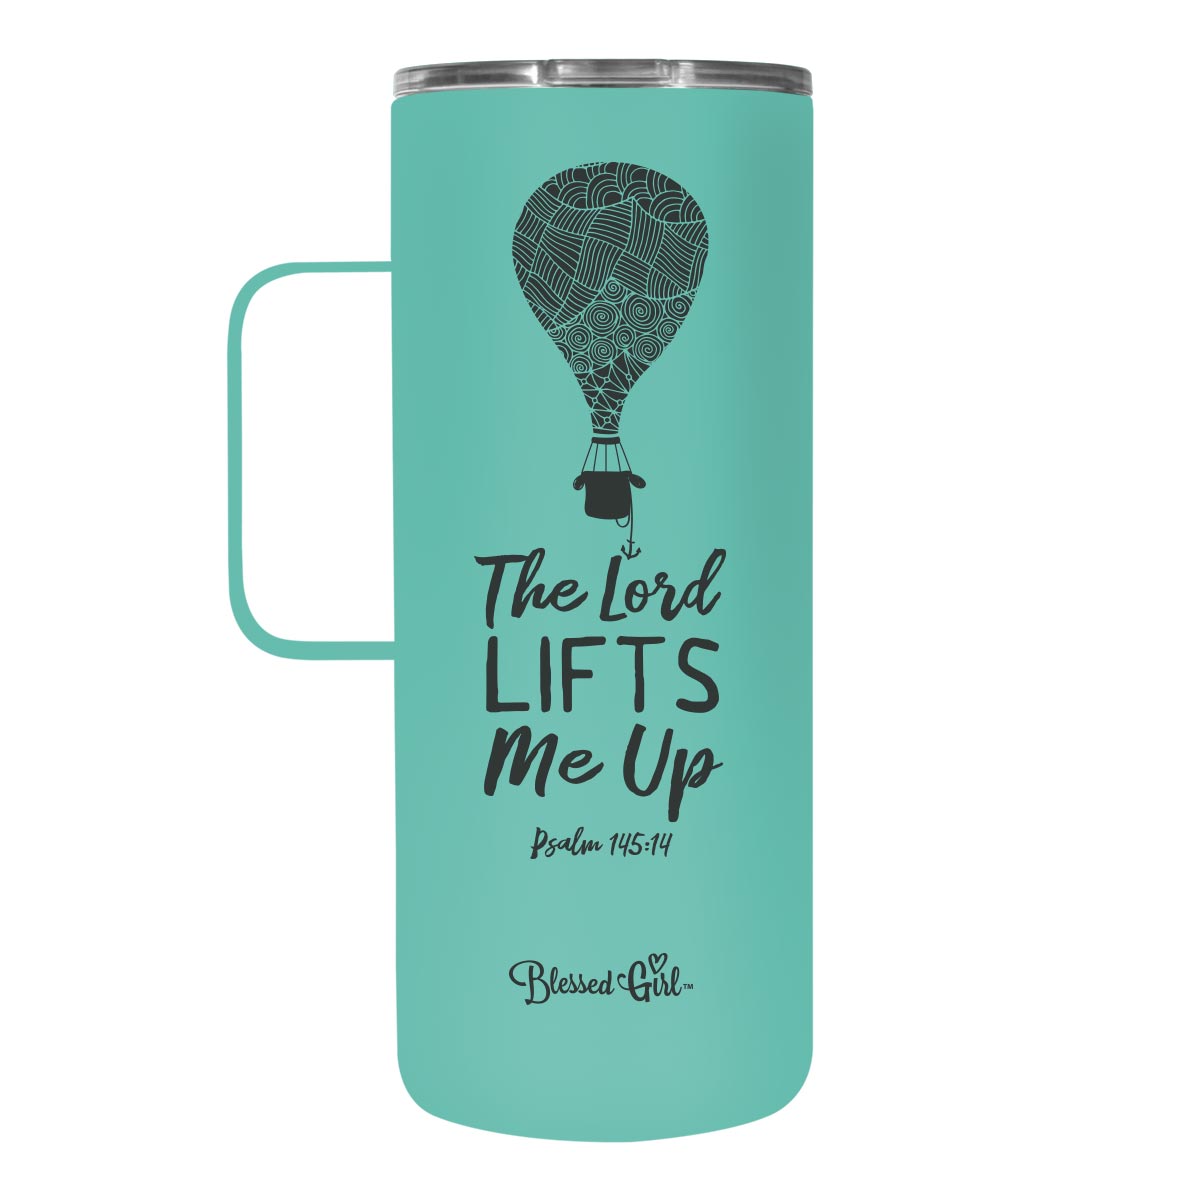 Blessed Girl 22 oz Stainless Steel Mug With Handle Lifts